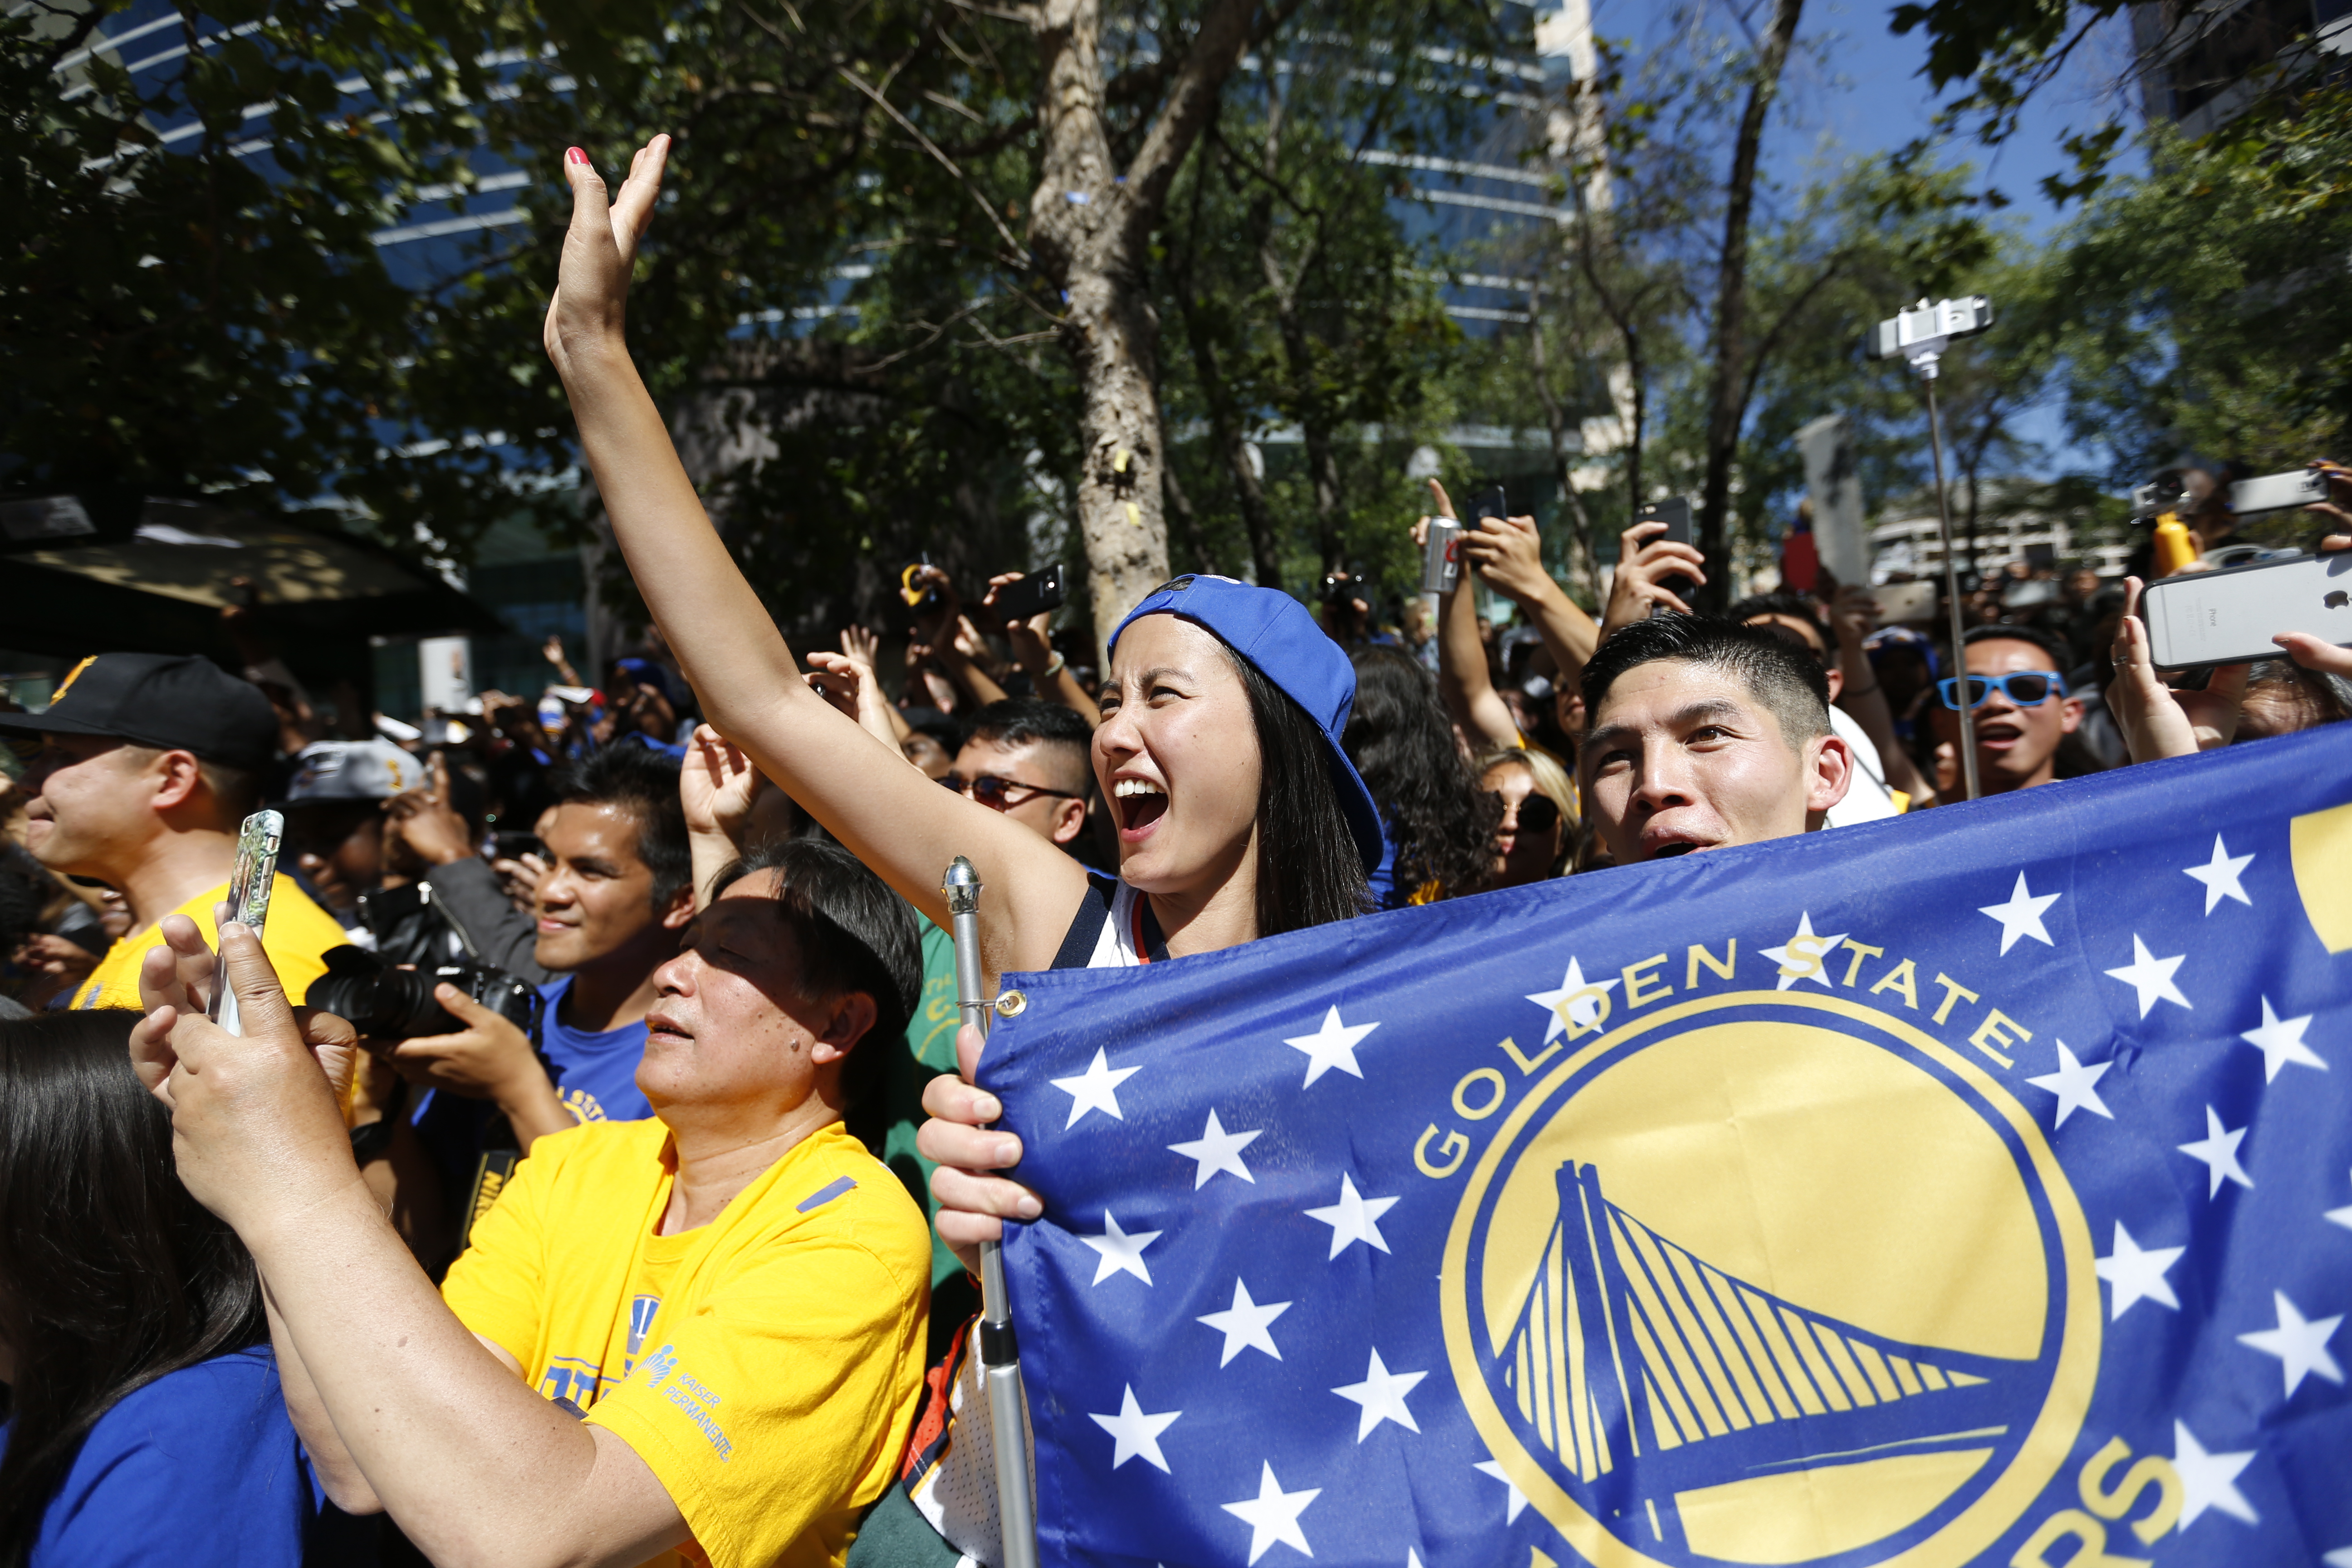 Warriors championship parade: When, where, how to watch